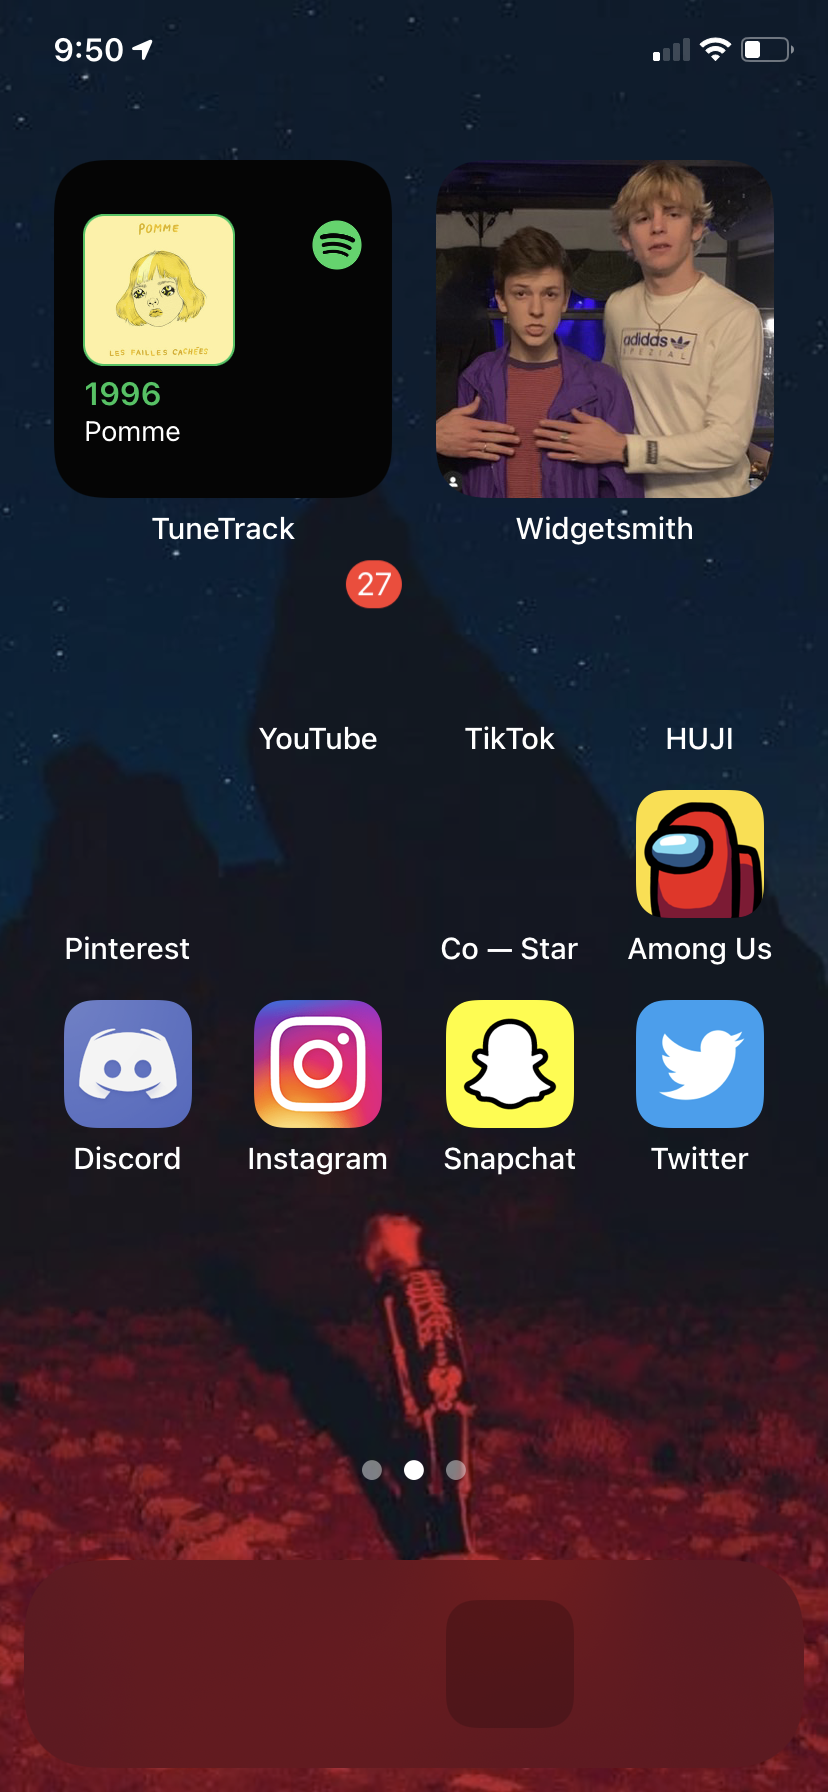 How do I find apps that disappear on my iPhone?